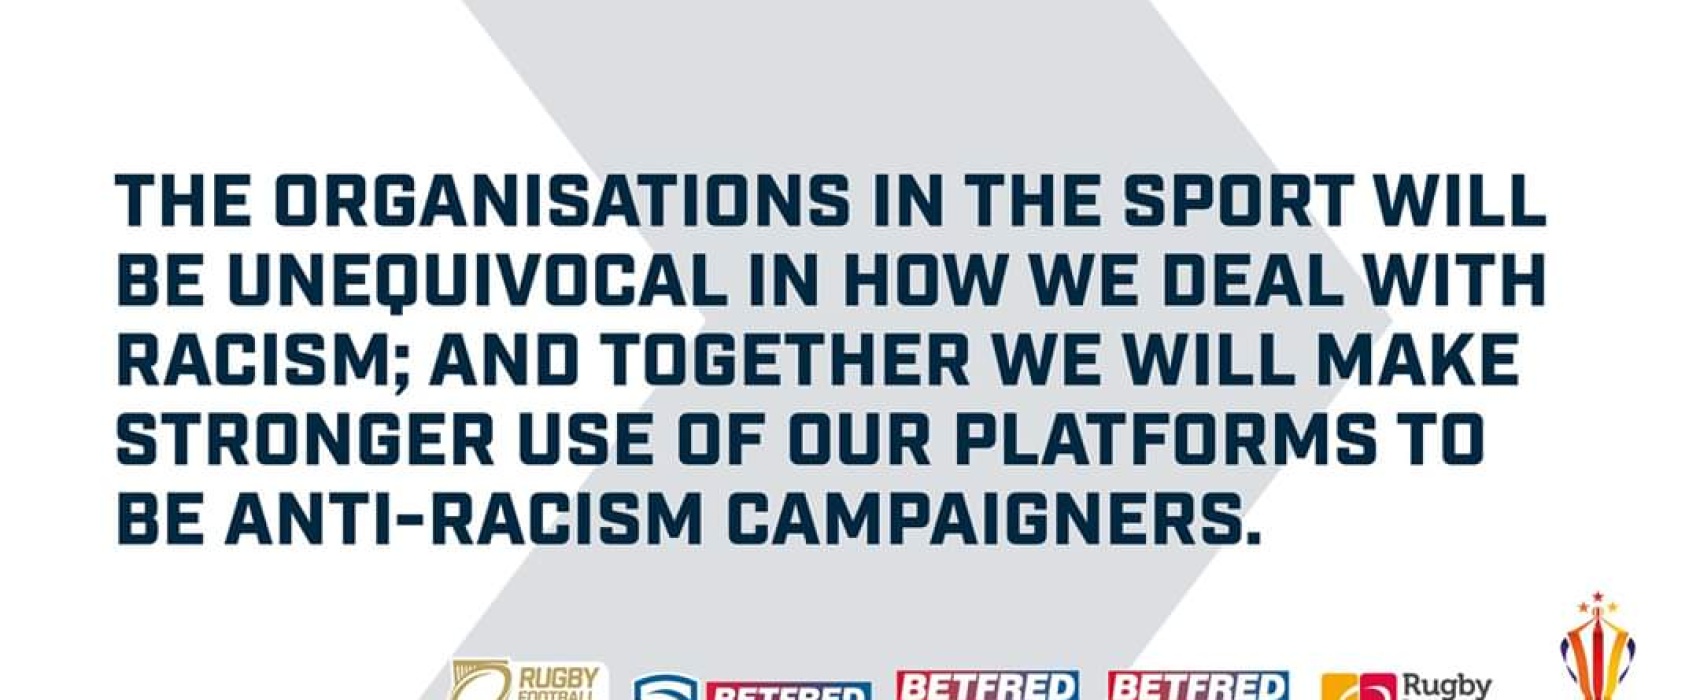 RUGBY LEAGUE STANDS IN SOLIDARITY AGAINST RACISM